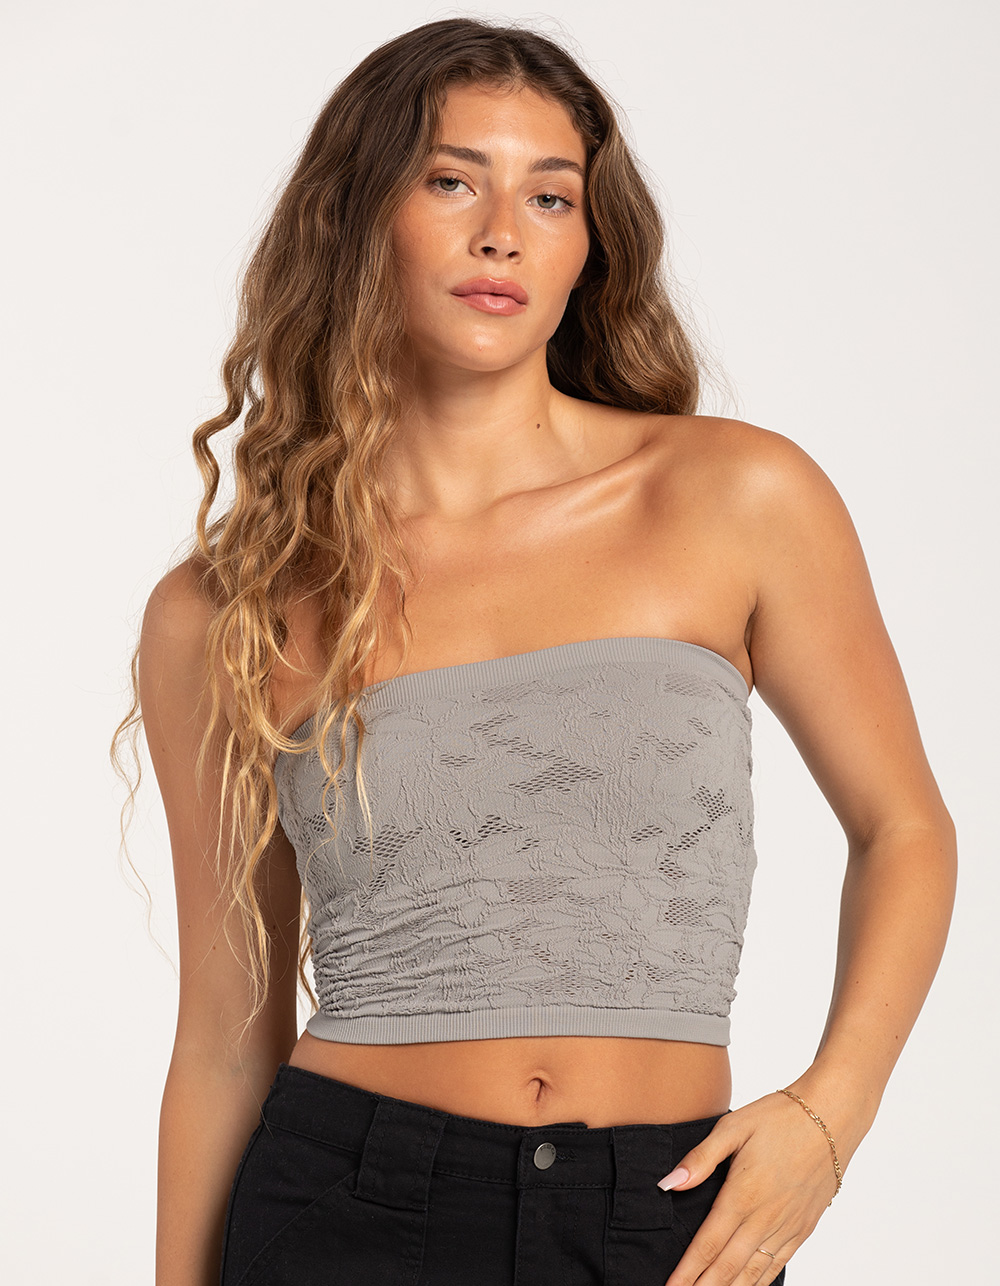 127-0Shops Seamless Textured Lace Womens Tube Top